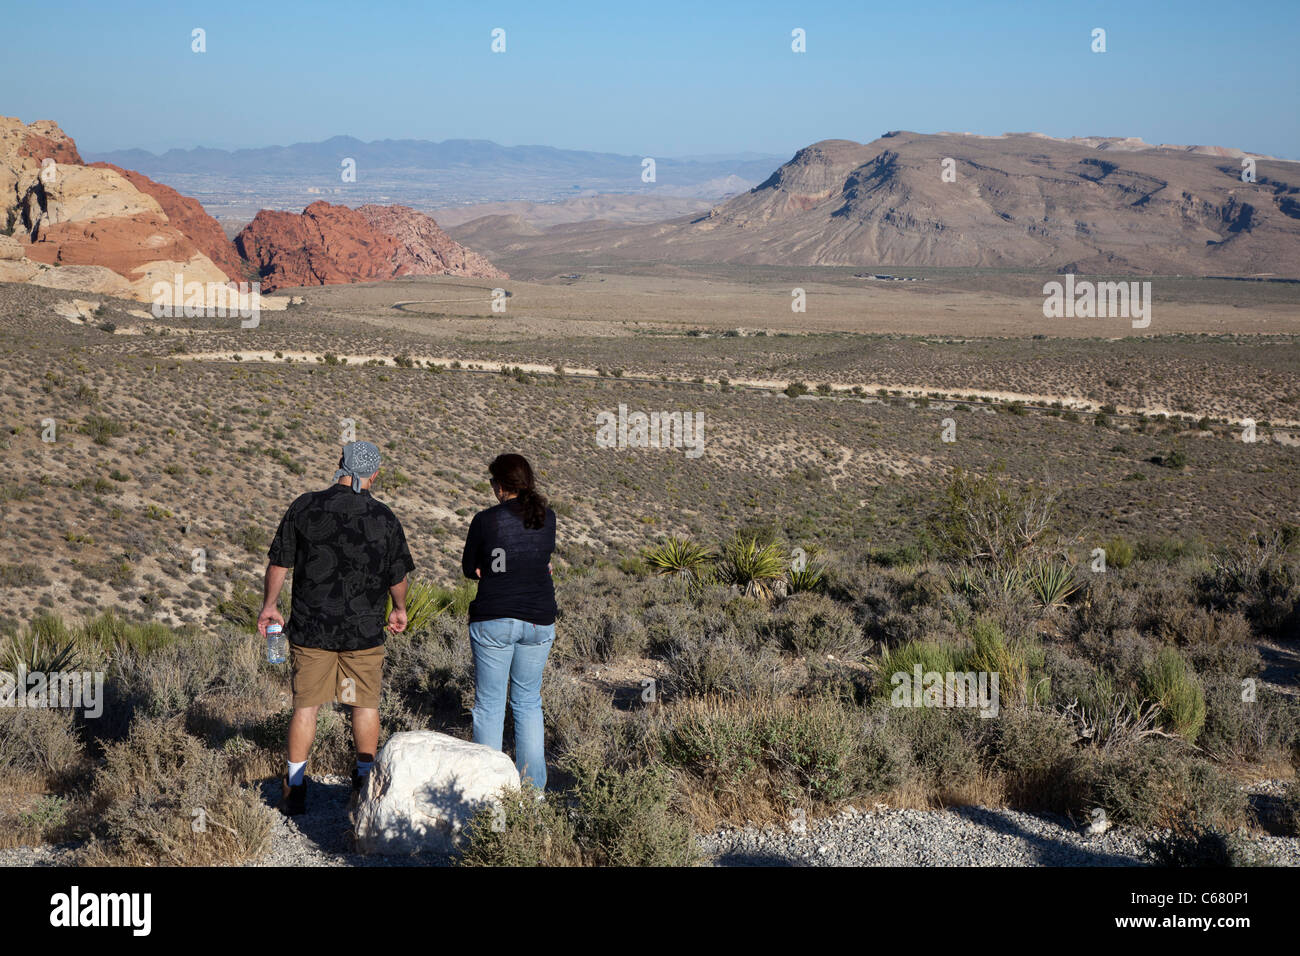 Las Vegas, Nevada - A couple looks over Red Rock Canyon towards the city of Las Vegas in the valley below. Stock Photo